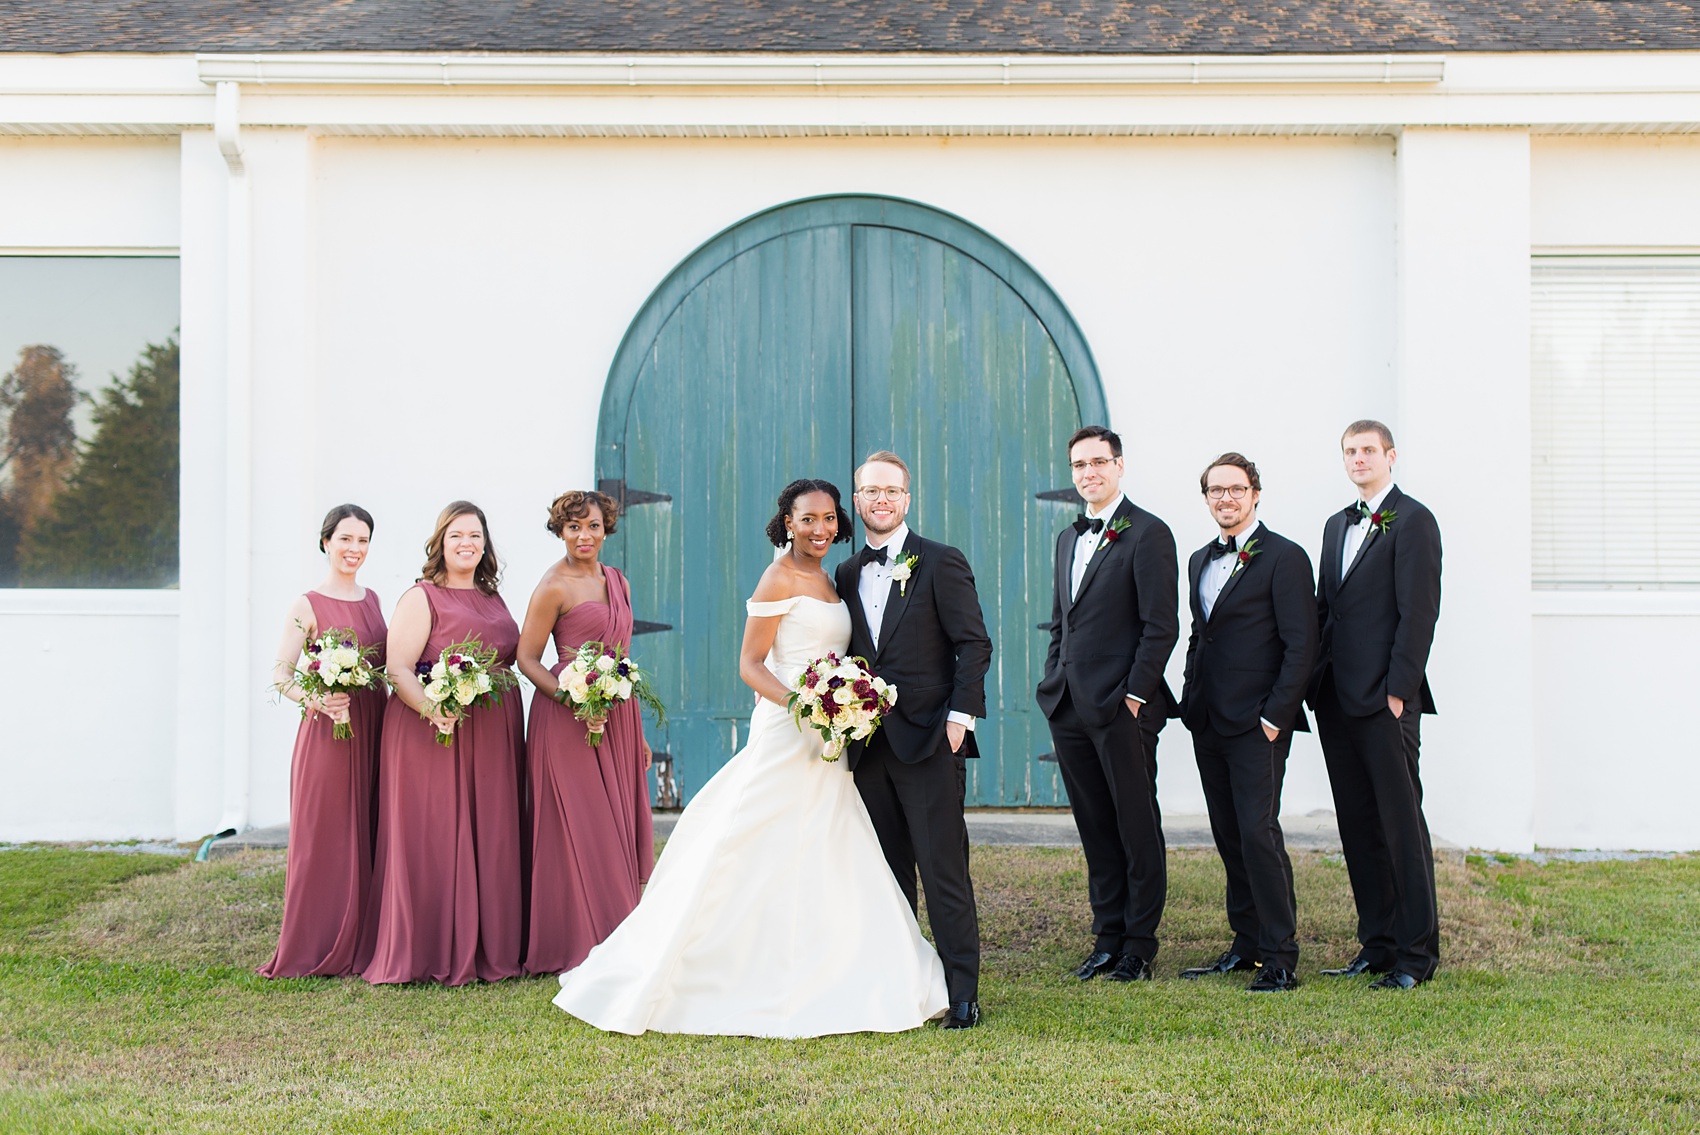 A fall wedding with burgundy, dusty rose and grey details. The bride and groom had three bridesmaids and groomsmen each, with the bridesmaids in cinnamon colored gowns and groomsmen in tuxedos. Mikkel Paige Photography, photographer in Greenville NC and Raleigh captured this wedding at Rock Springs Center, planned by @vivalevent. Click through for more details and pictures from this autumn celebration! #mikkelpaige #northcarolinawedding #southernwedding #bridesmaids#weddingparty #bridalparty